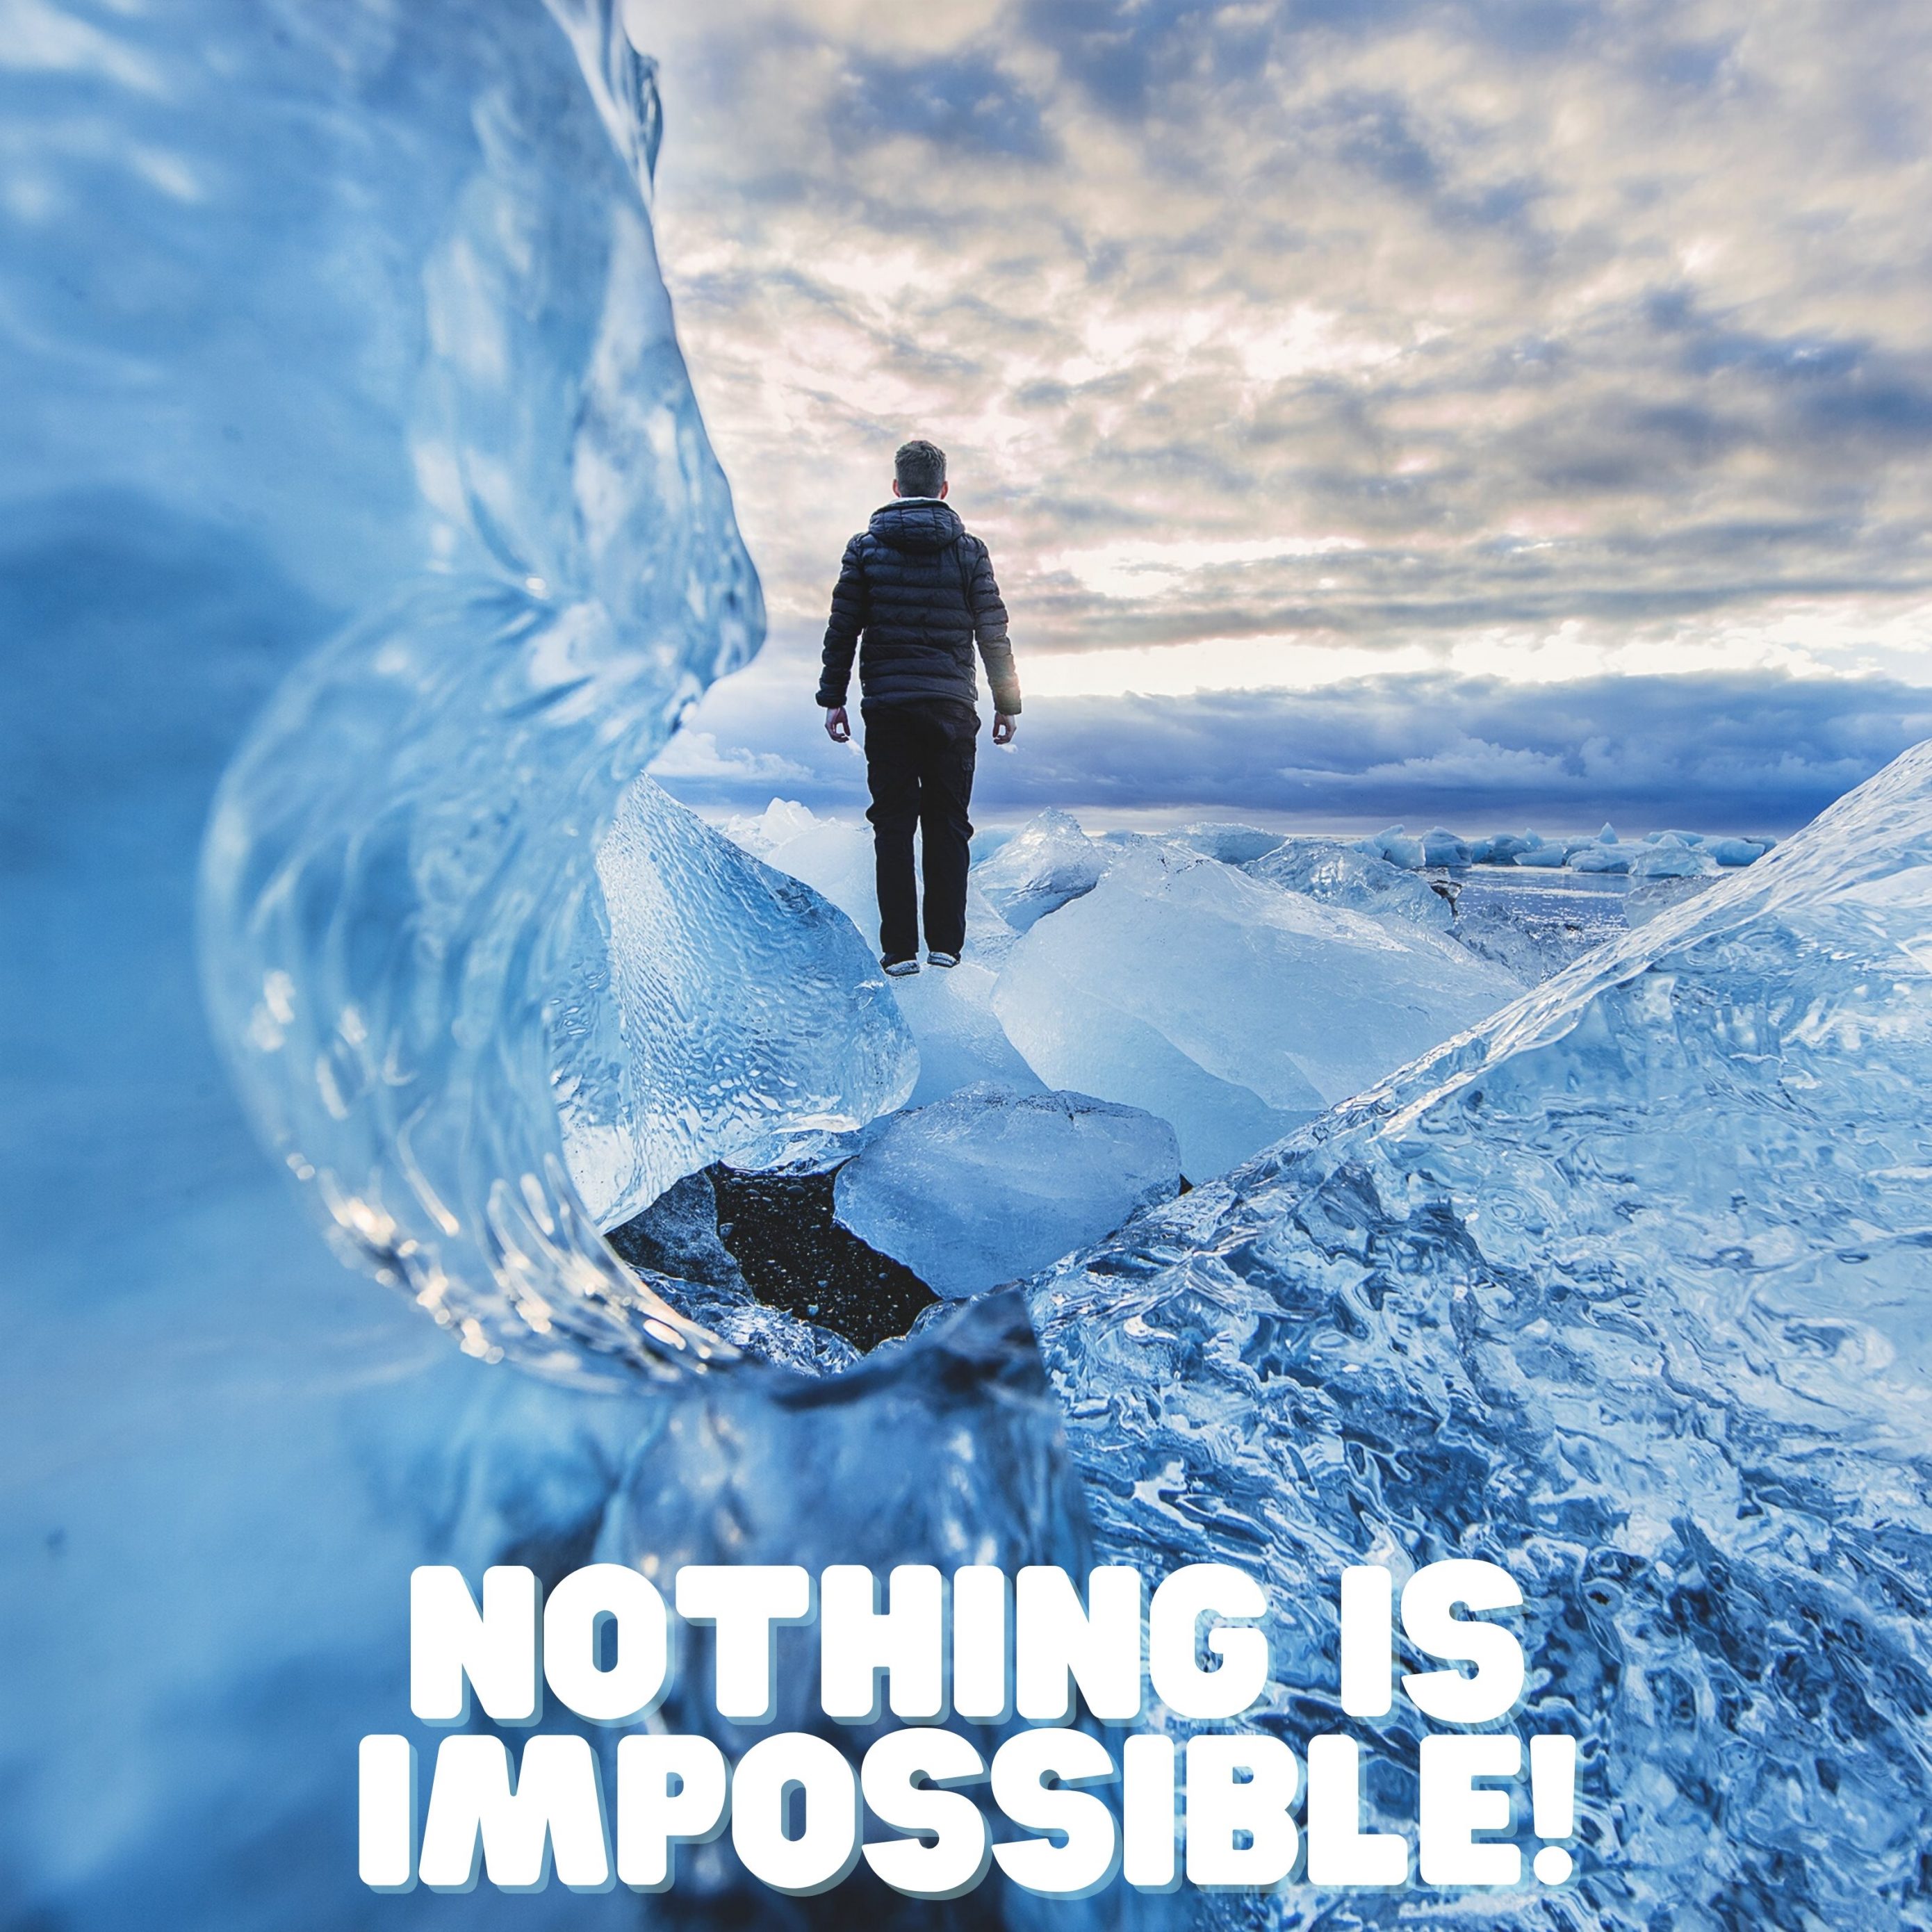 2780x2780 Parallax wallpaper 4k Nothing Is Impossible Quote iPad Wallpaper 2780x2780 pixels resolution